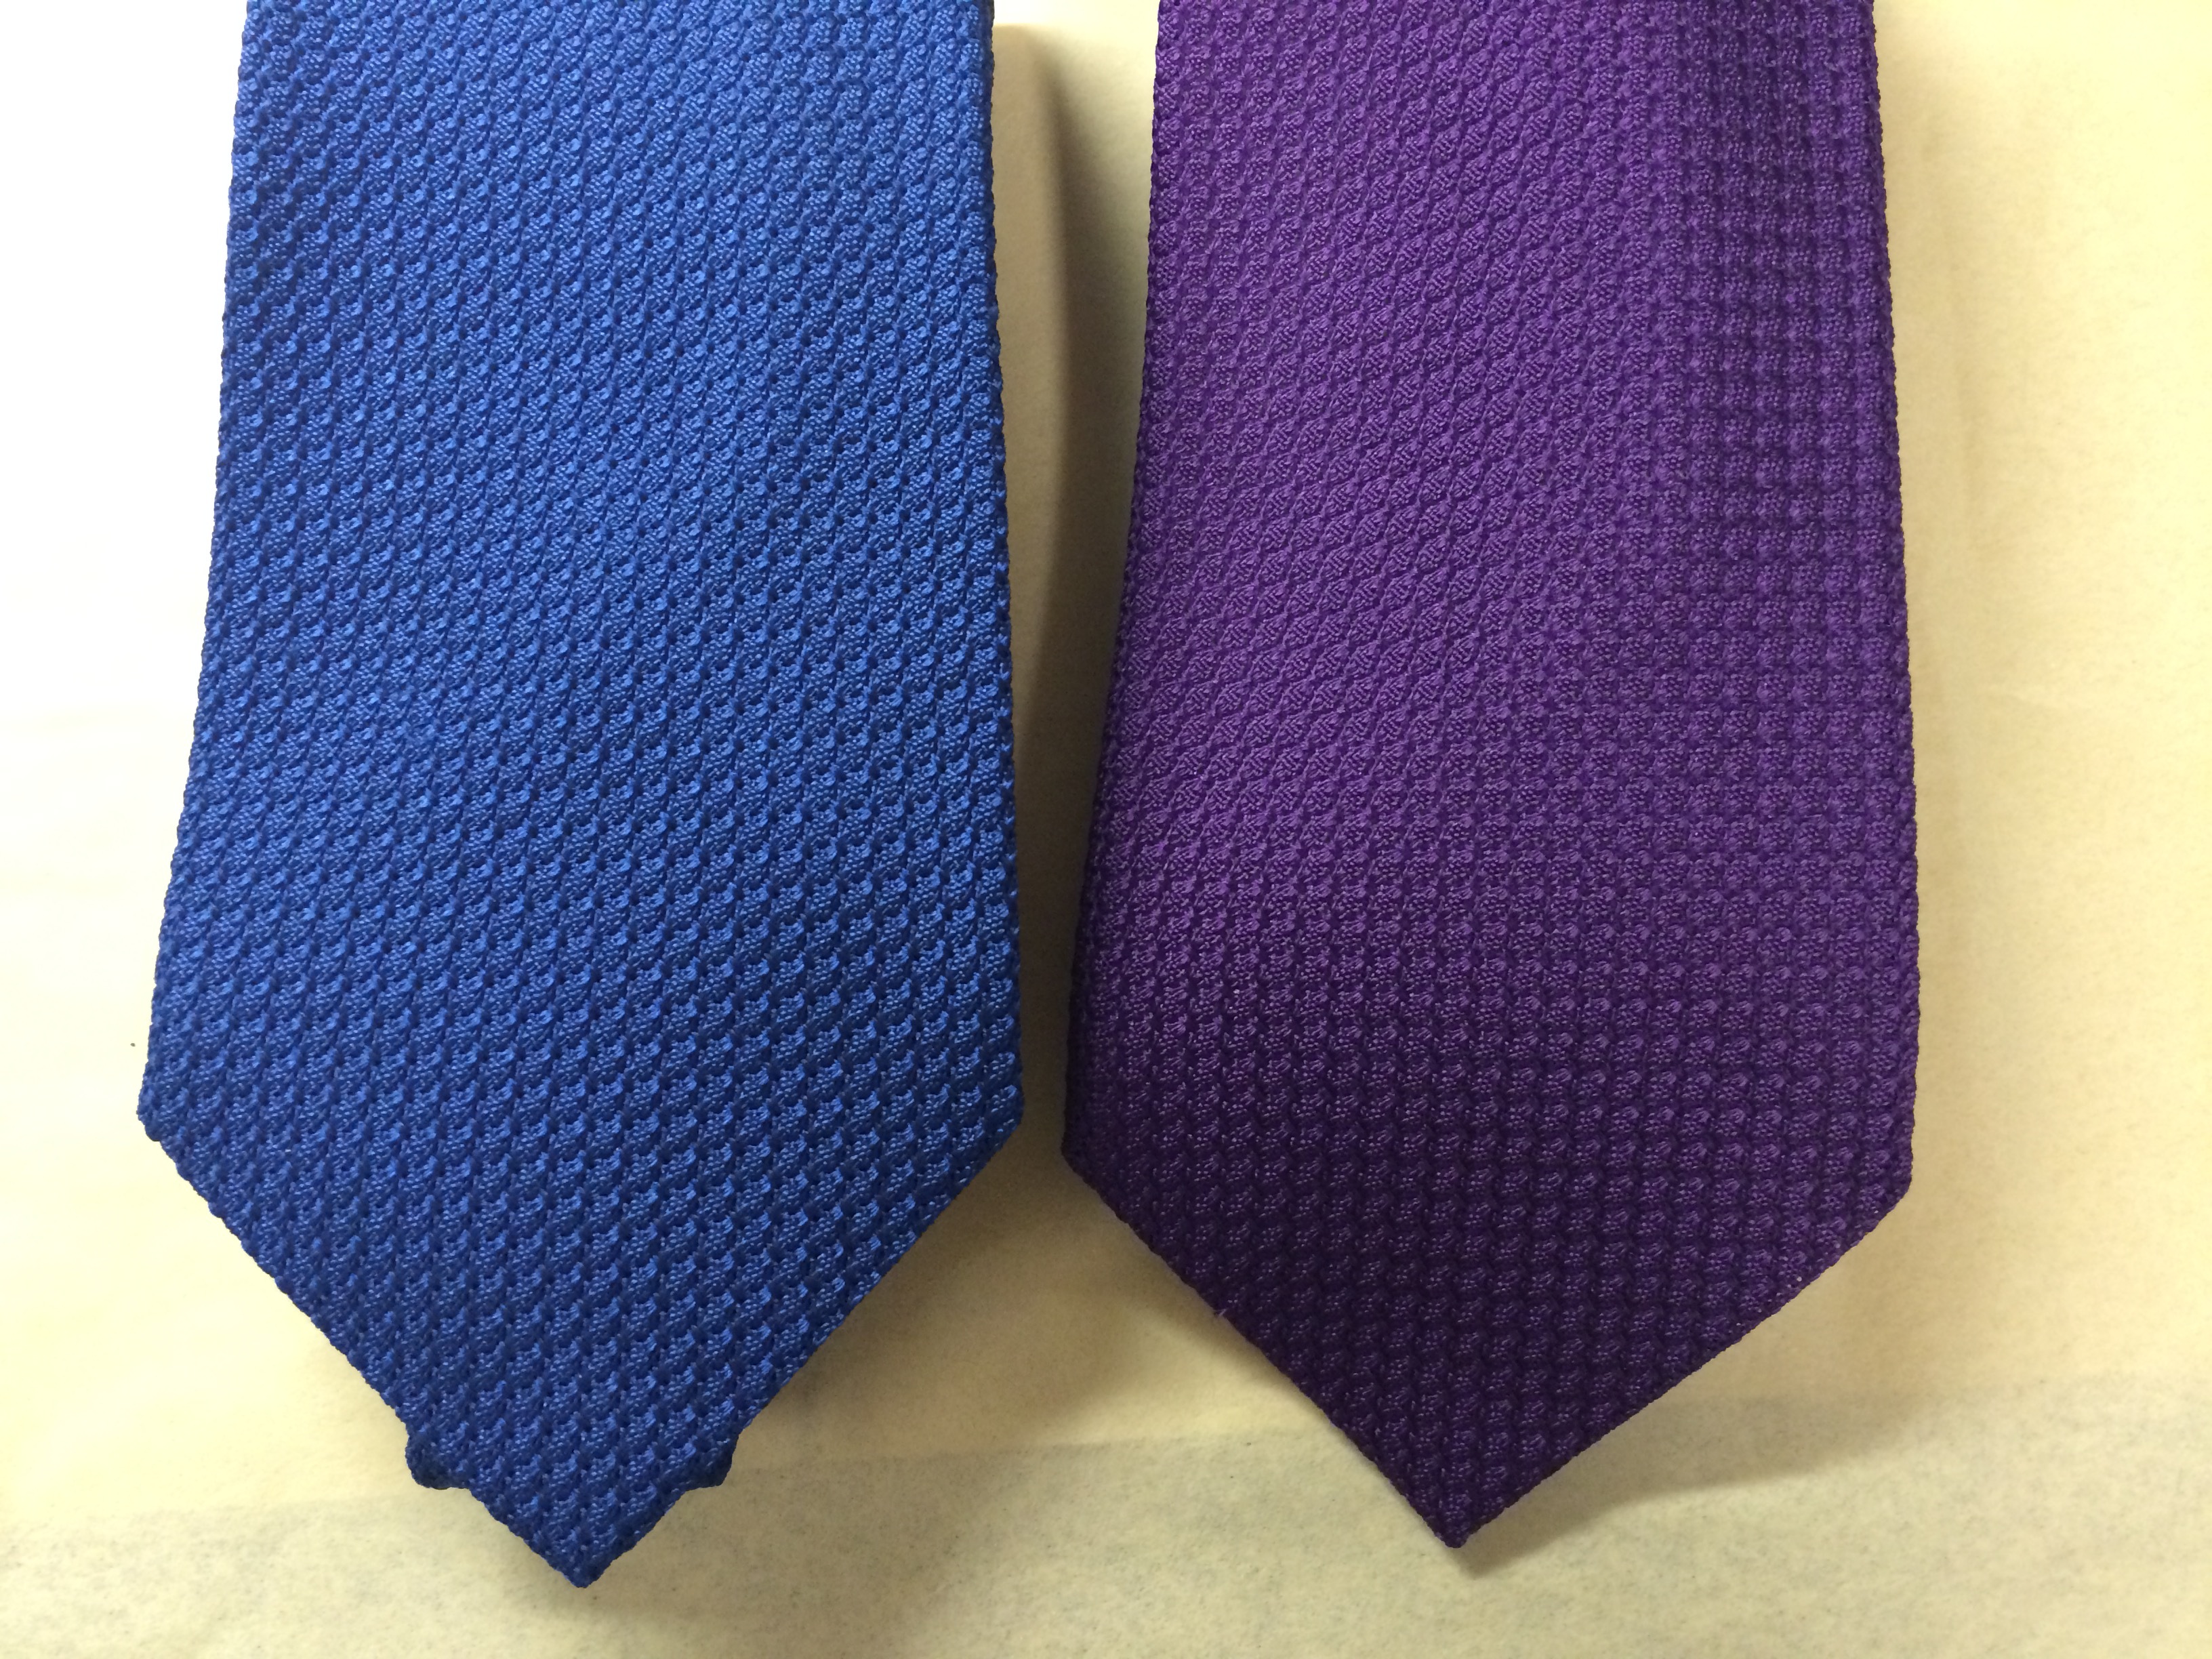 Drop 2/15! New TOM FORD Grenadine Ties! Blue and Purple in Classic Widths!  | Styleforum